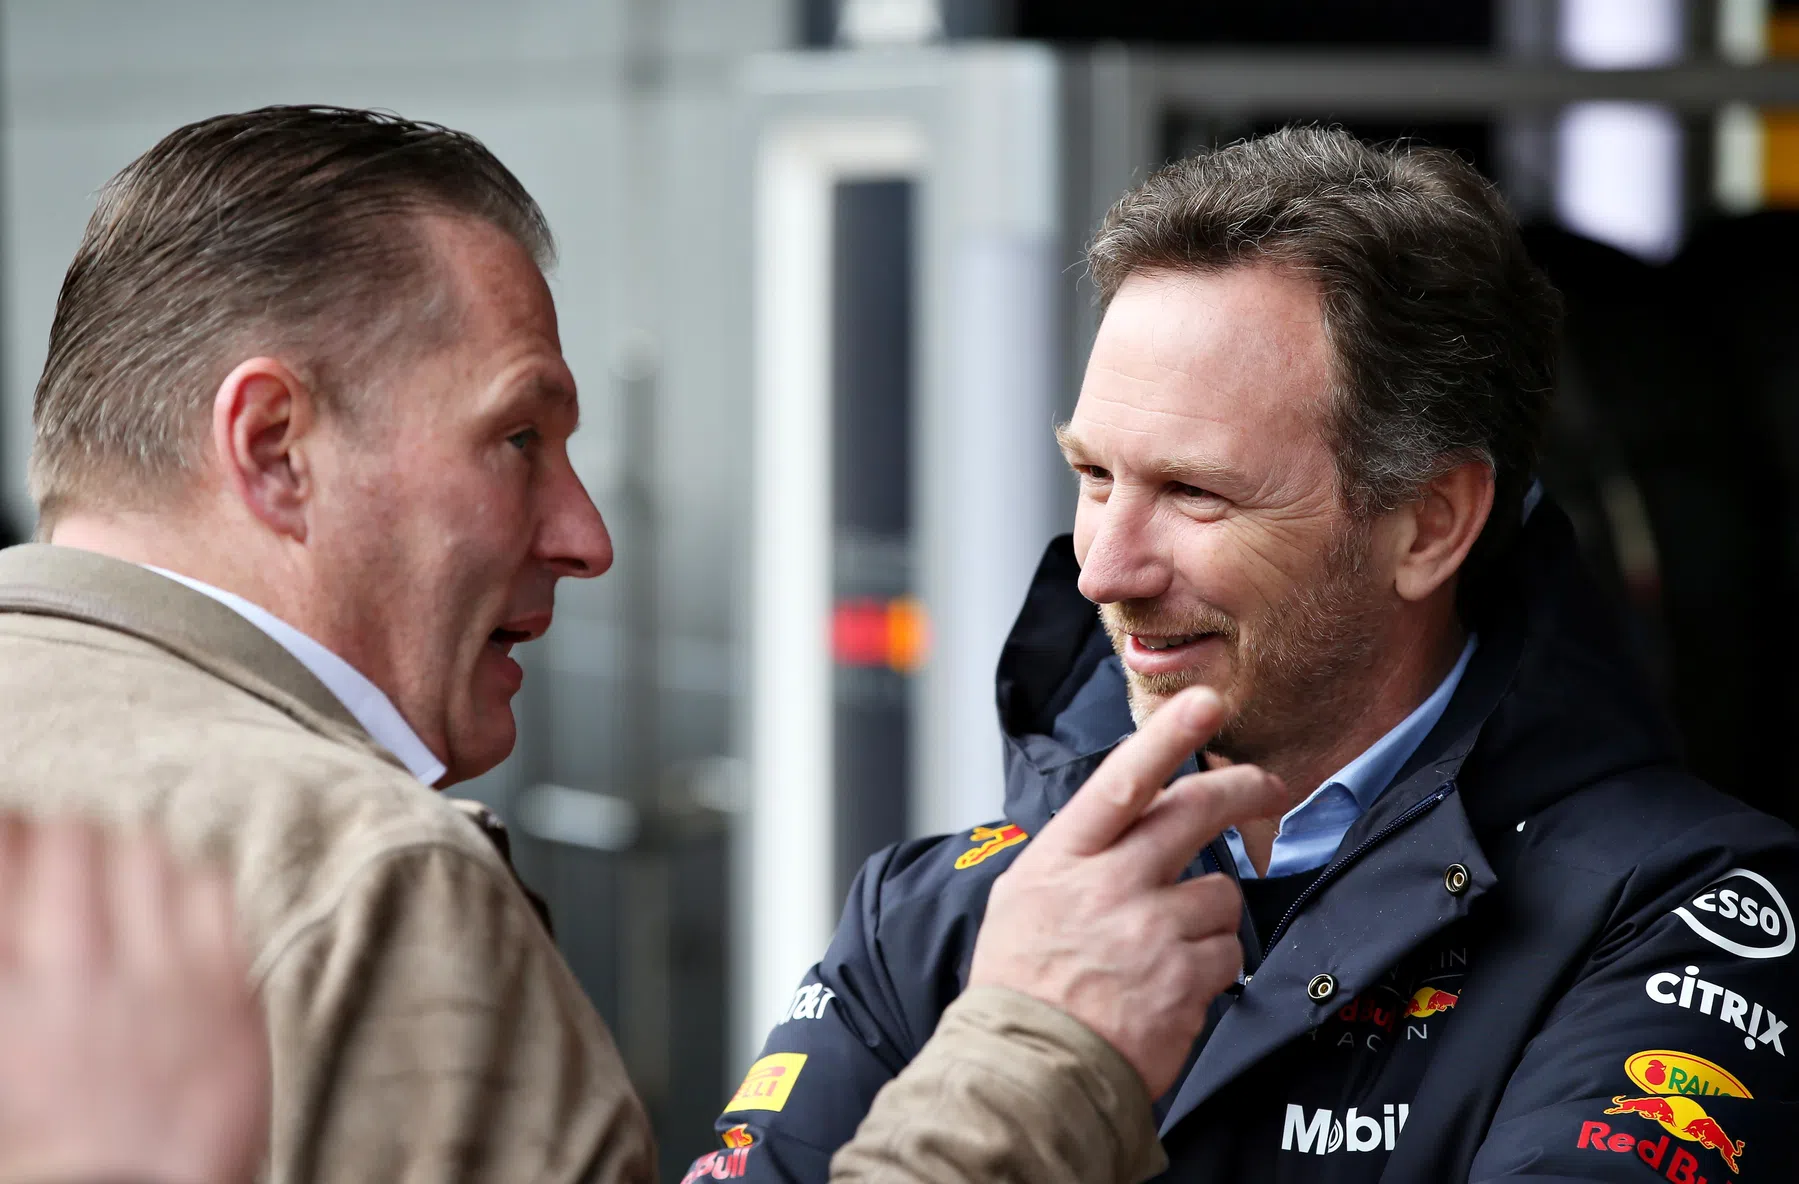 How did things escalate so much between Horner and Jos Verstappen?